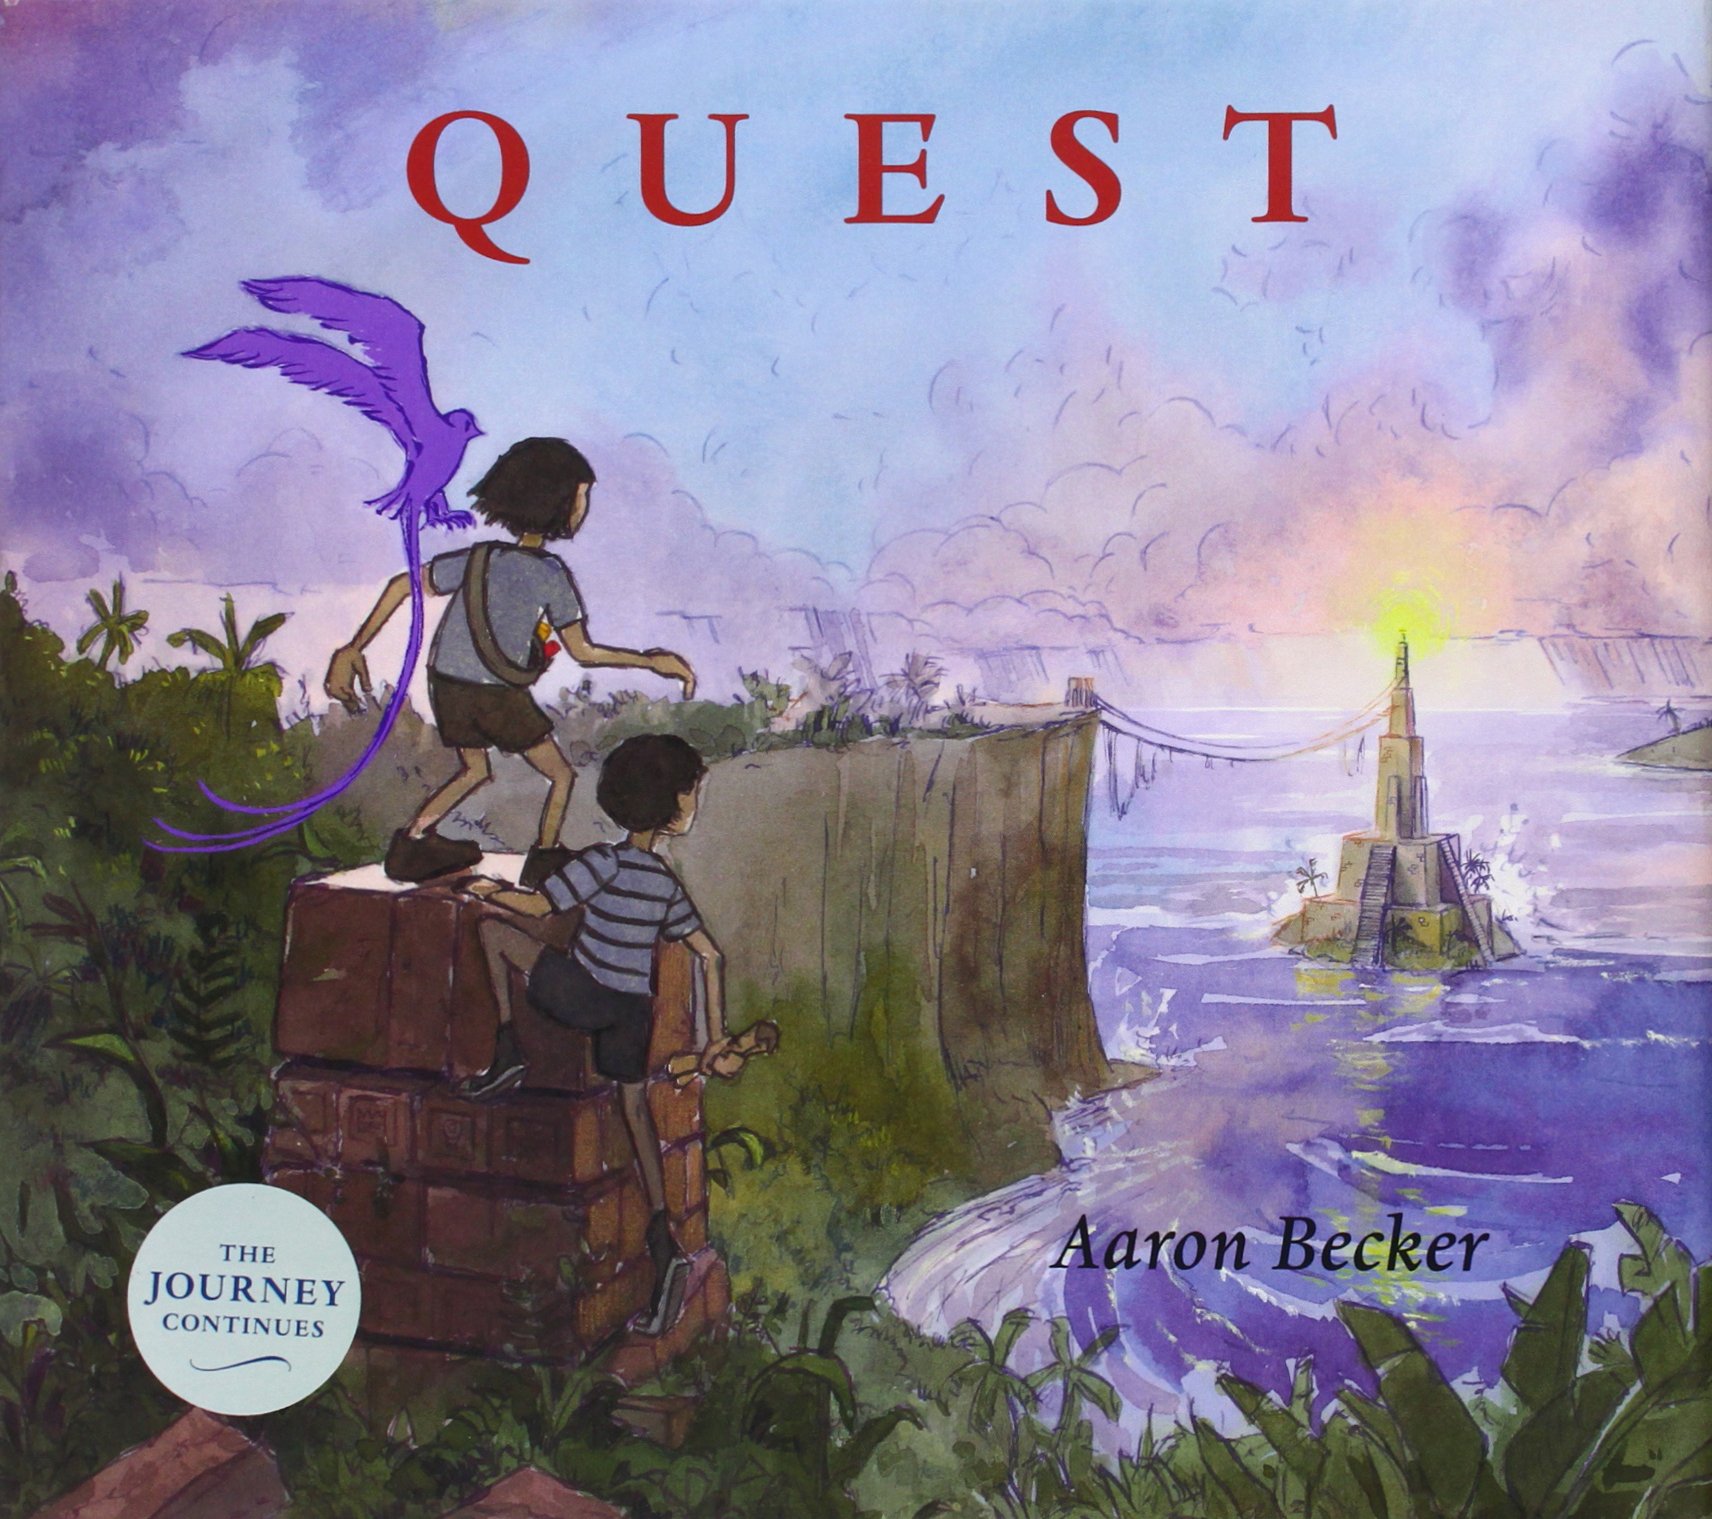 the journey picture book aaron becker